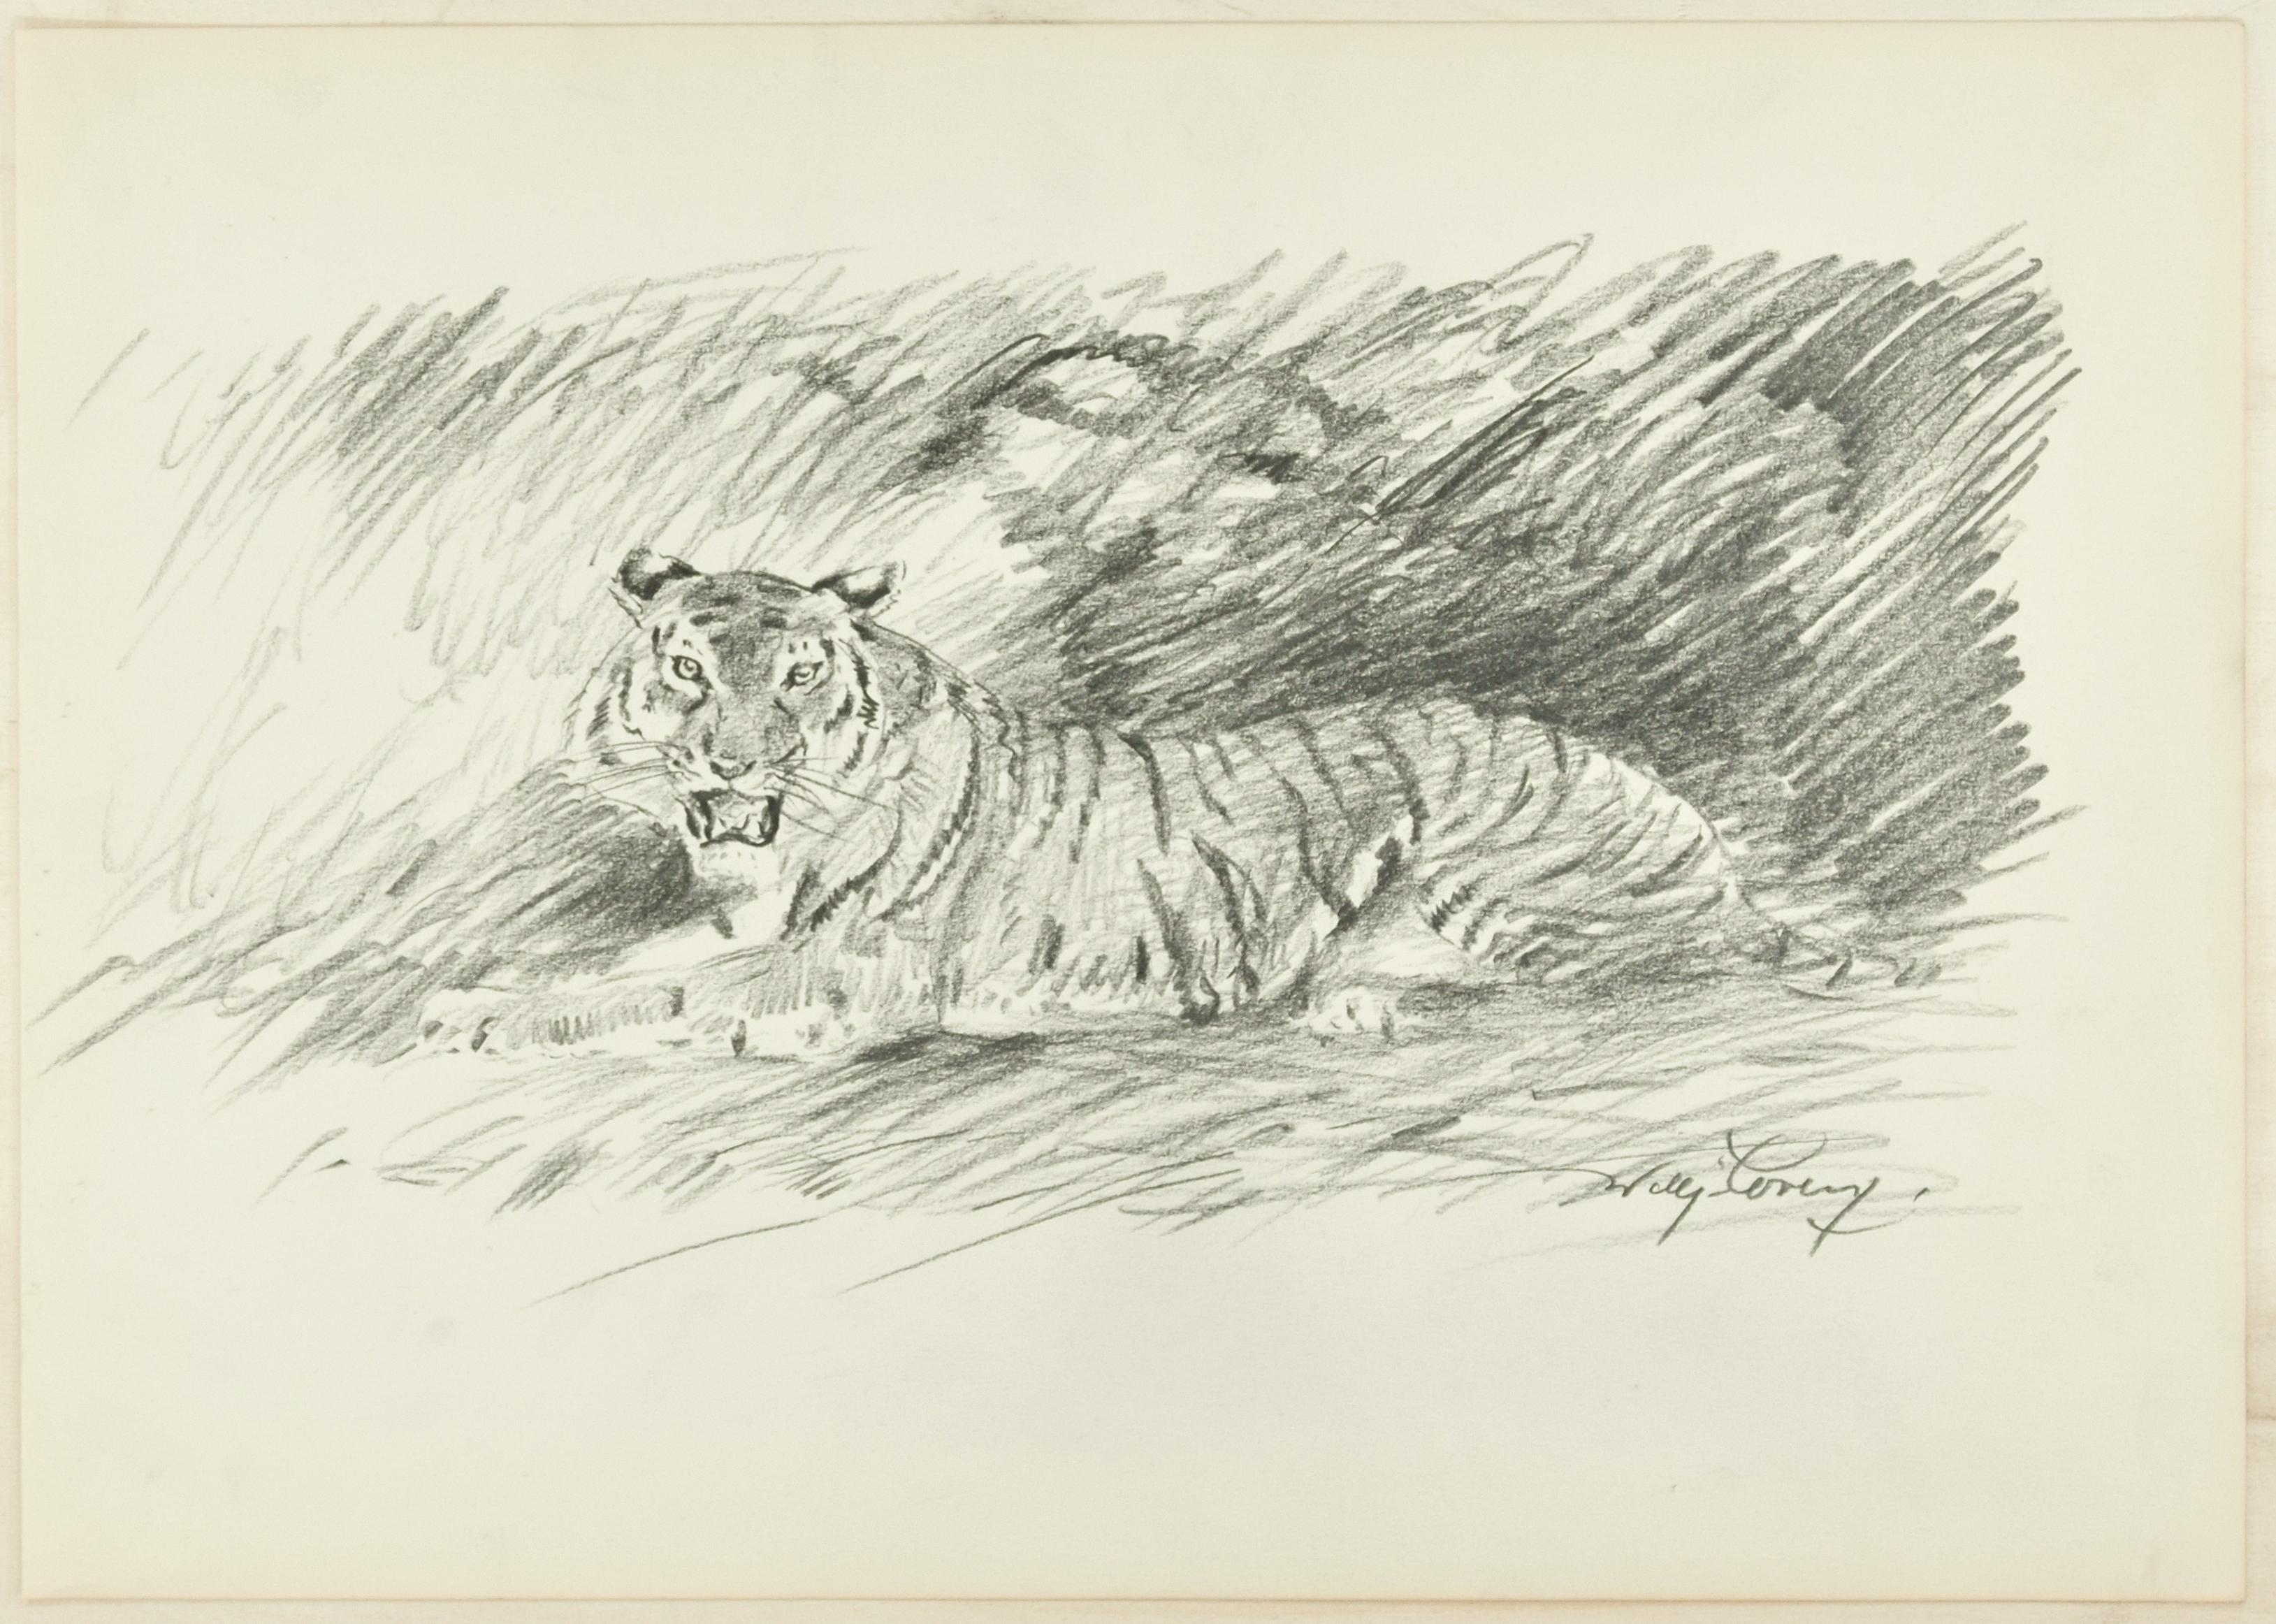 Roaring Tiger - Original Pencil Drawing by Willy Lorenz - 1940s